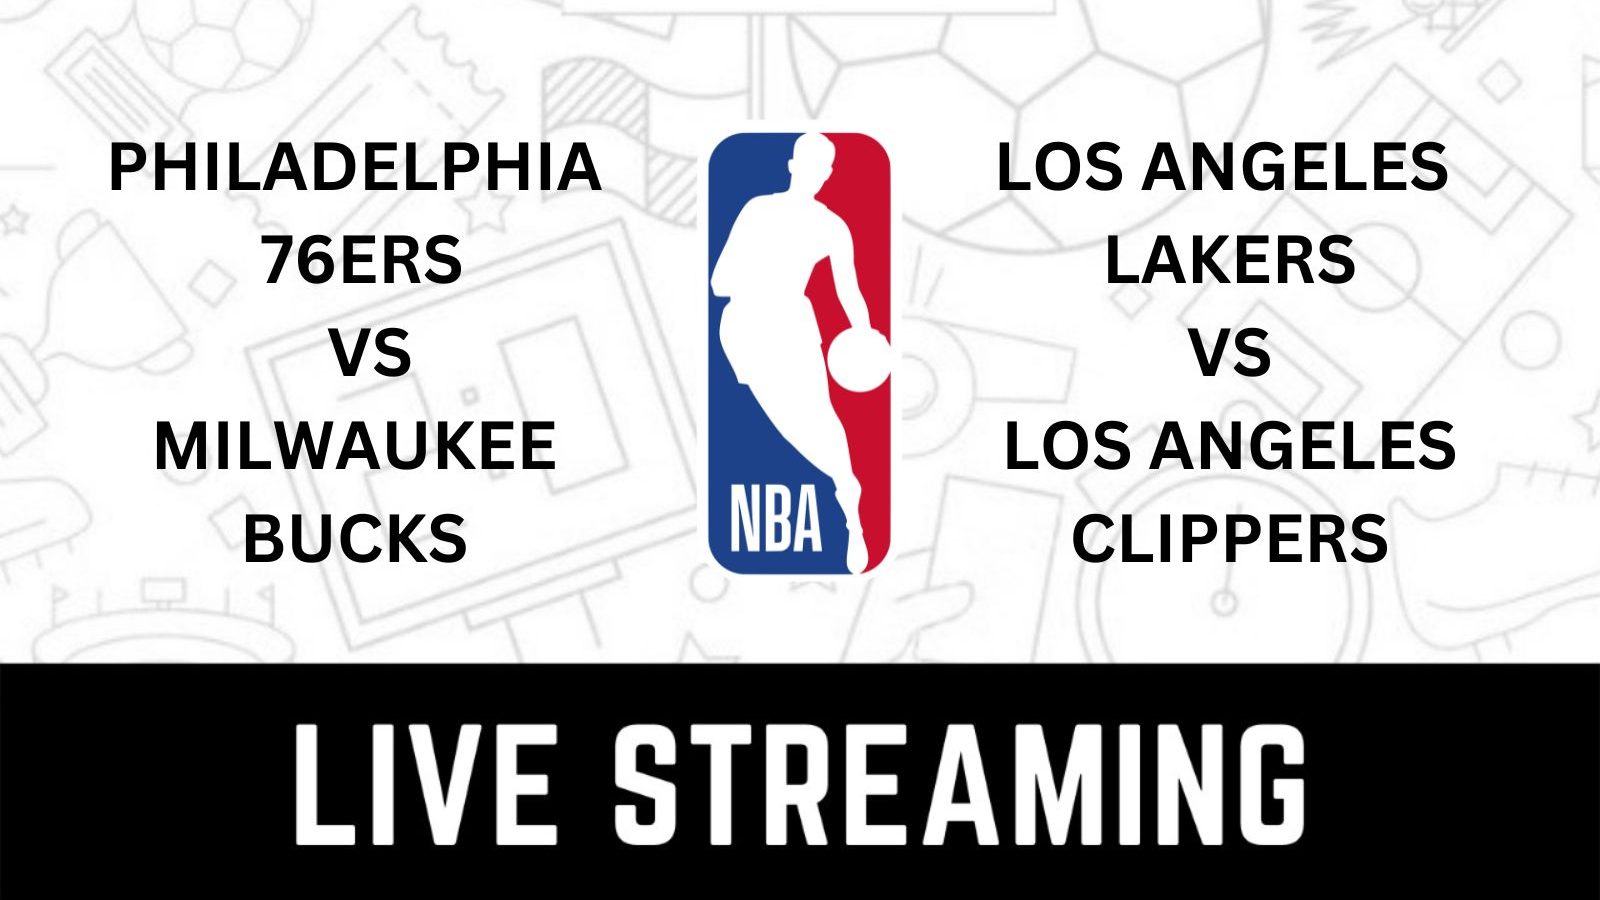 Philadelphia 76ers vs Milwaukee Bucks and Los Angeles Lakers vs Los Angeles Clippers Live Streaming When and Where to Watch NBA Live Coverage on Live TV Online